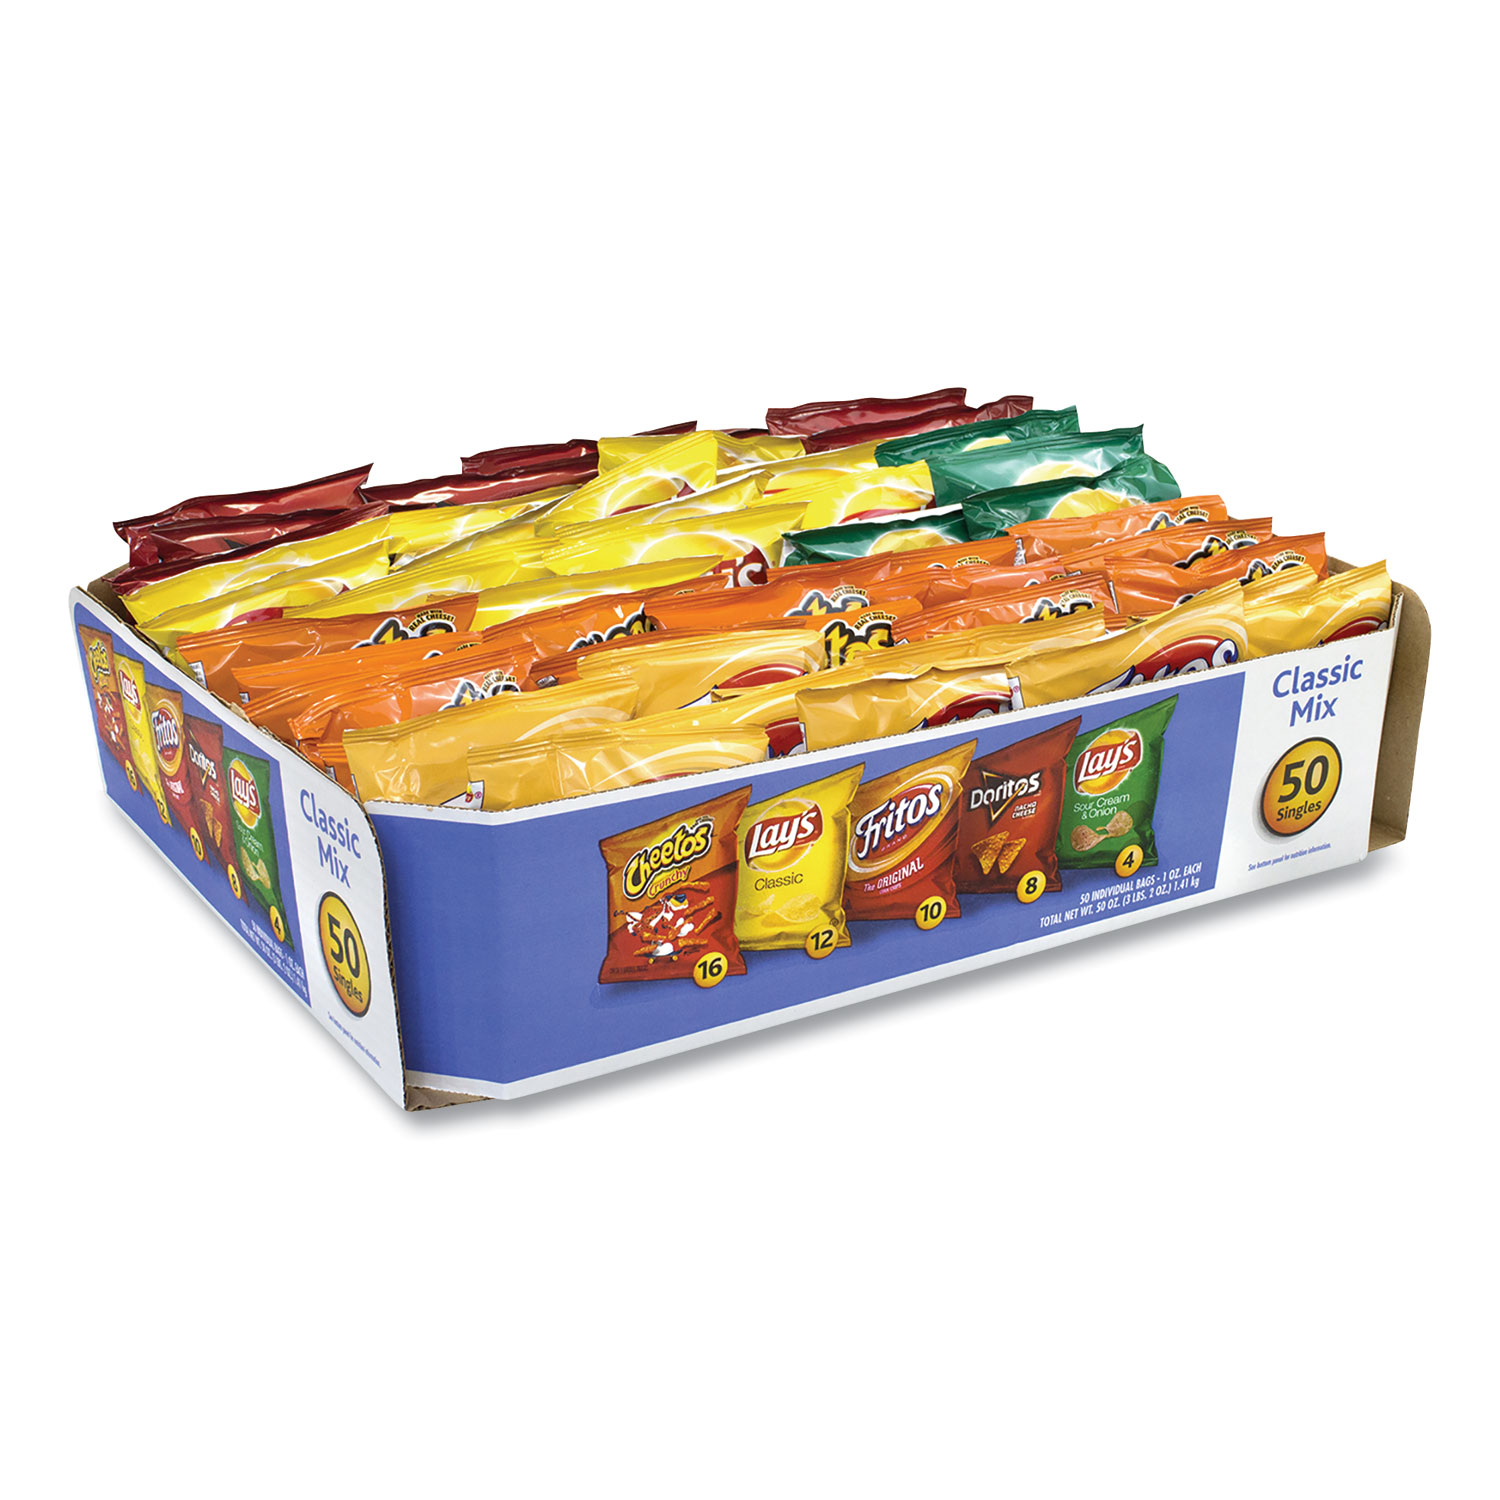 Frito-Lay Potato Chips Bags Variety Pack, Assorted Flavors, 1 oz Bag, 50 Bags/Carton, Free Delivery in 1-4 Business Days